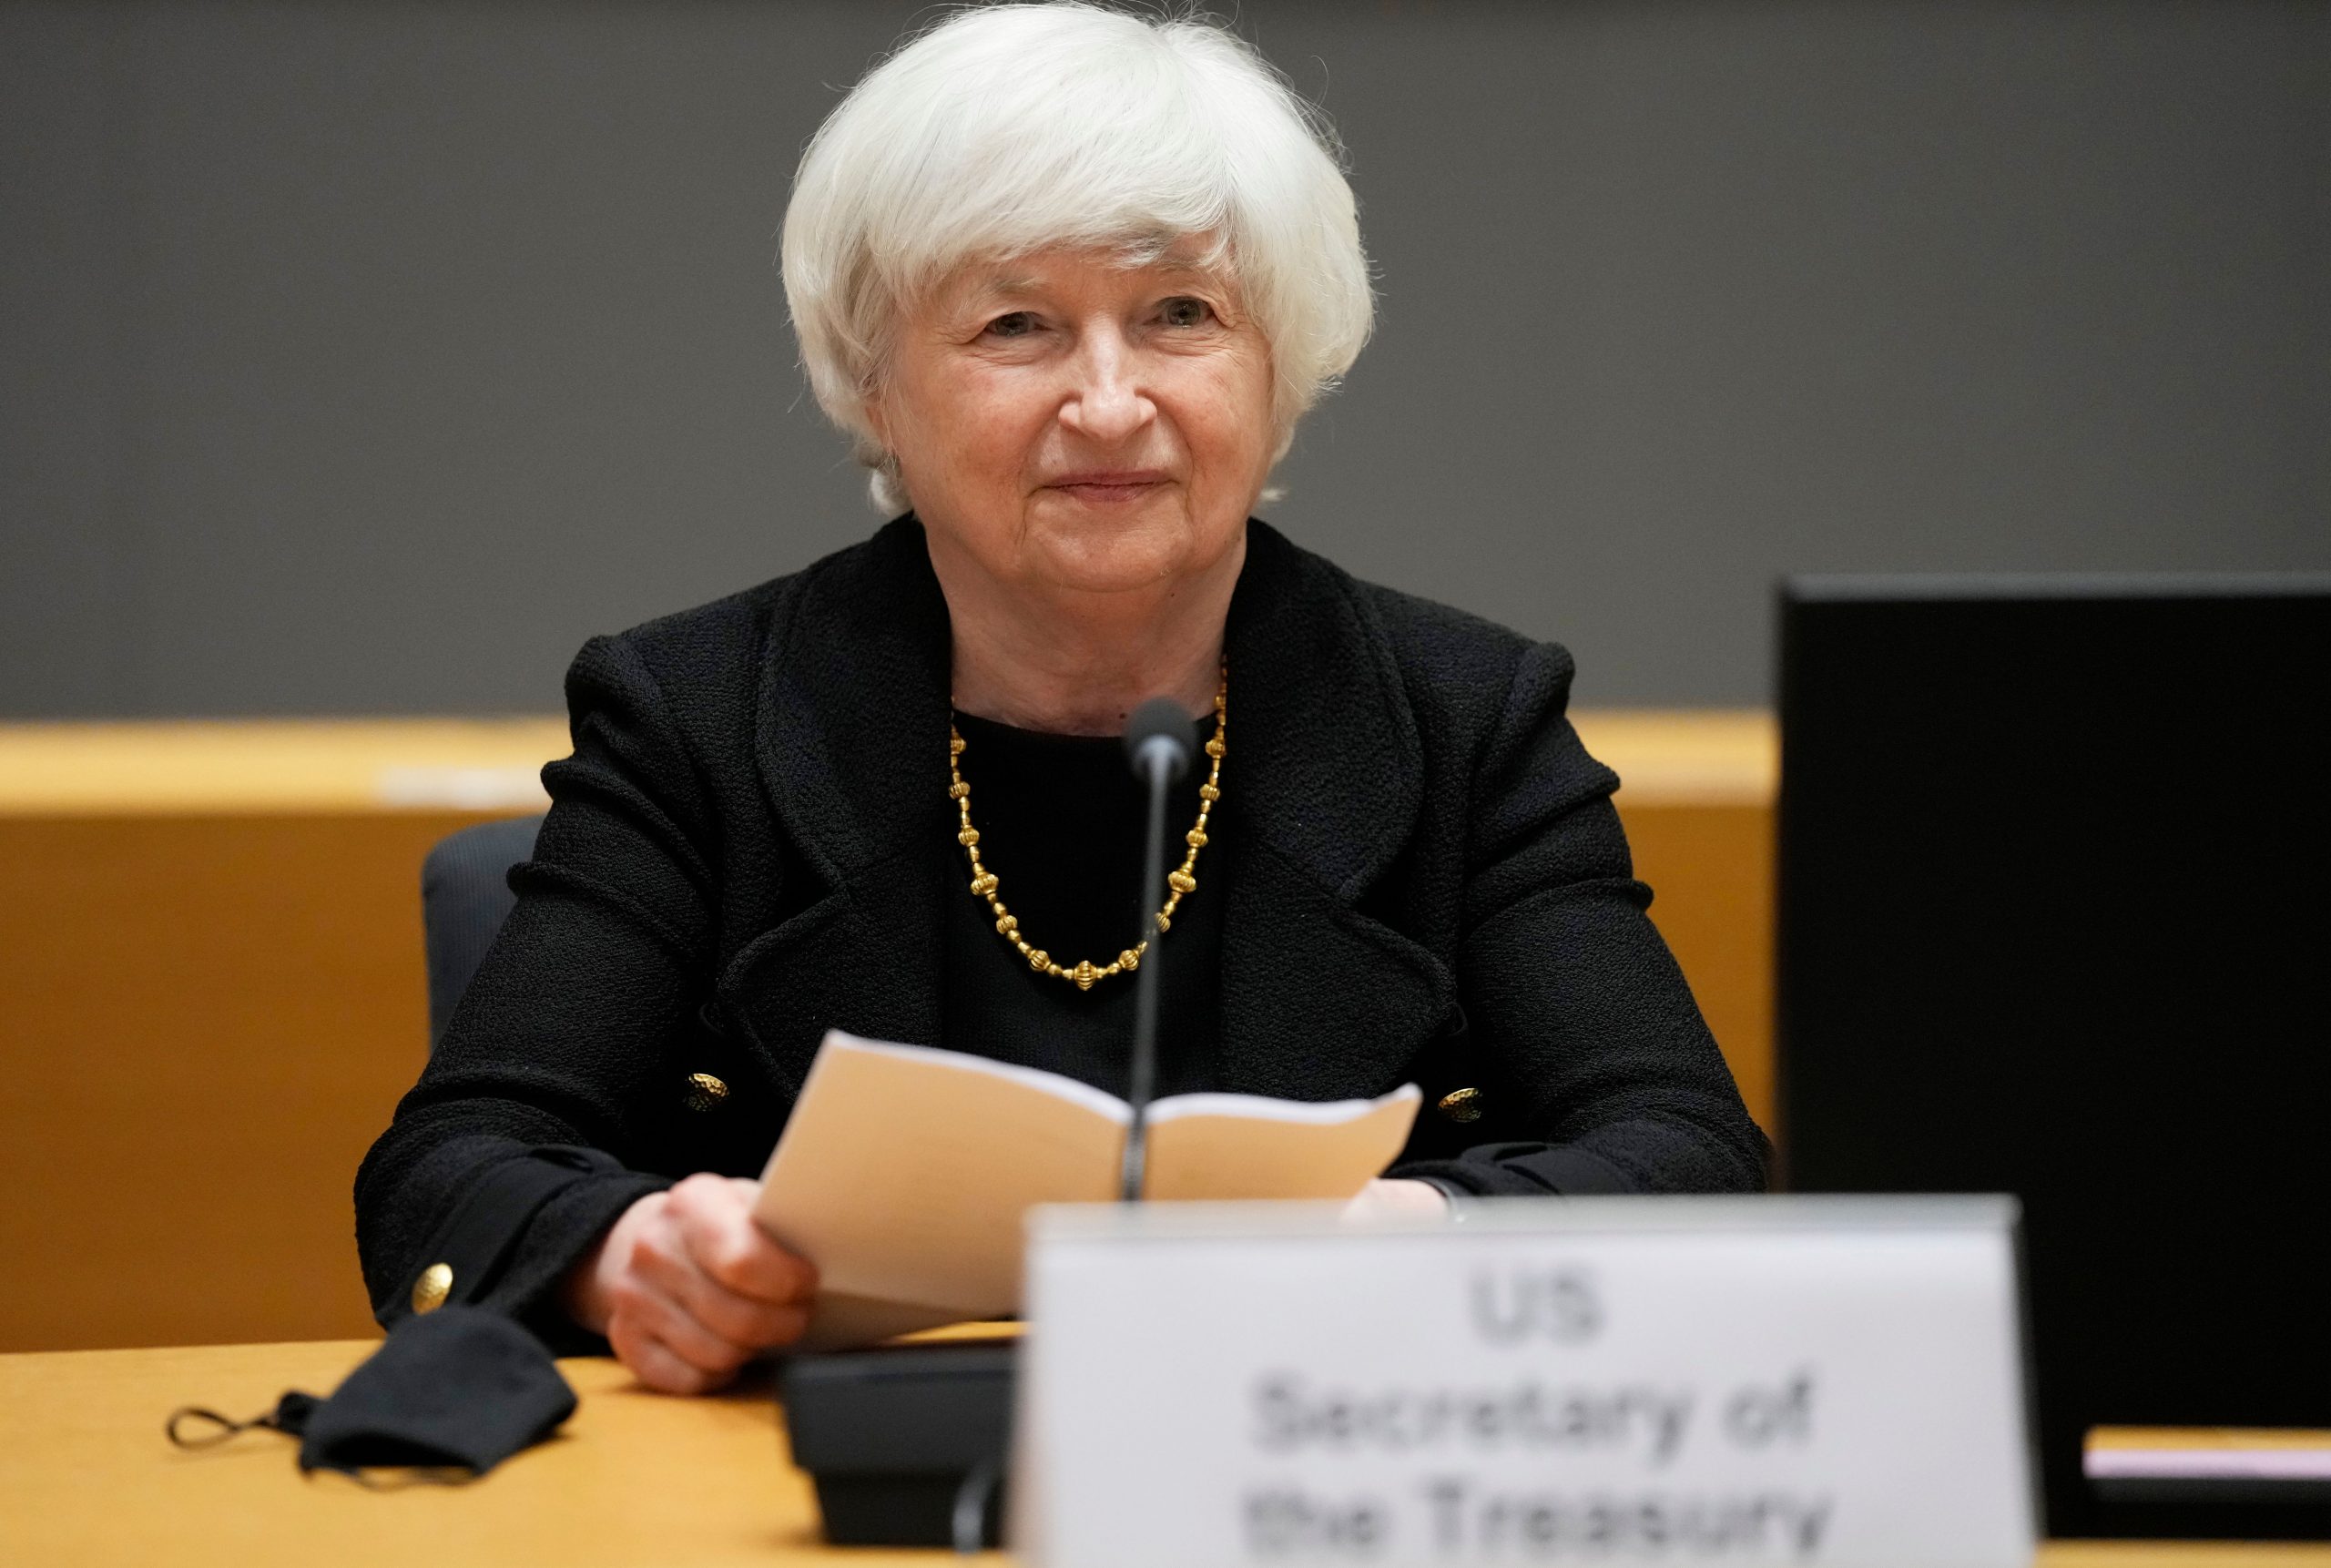 Treasury Secretary Janet Yellen before midterms: No sign of recession in US economy